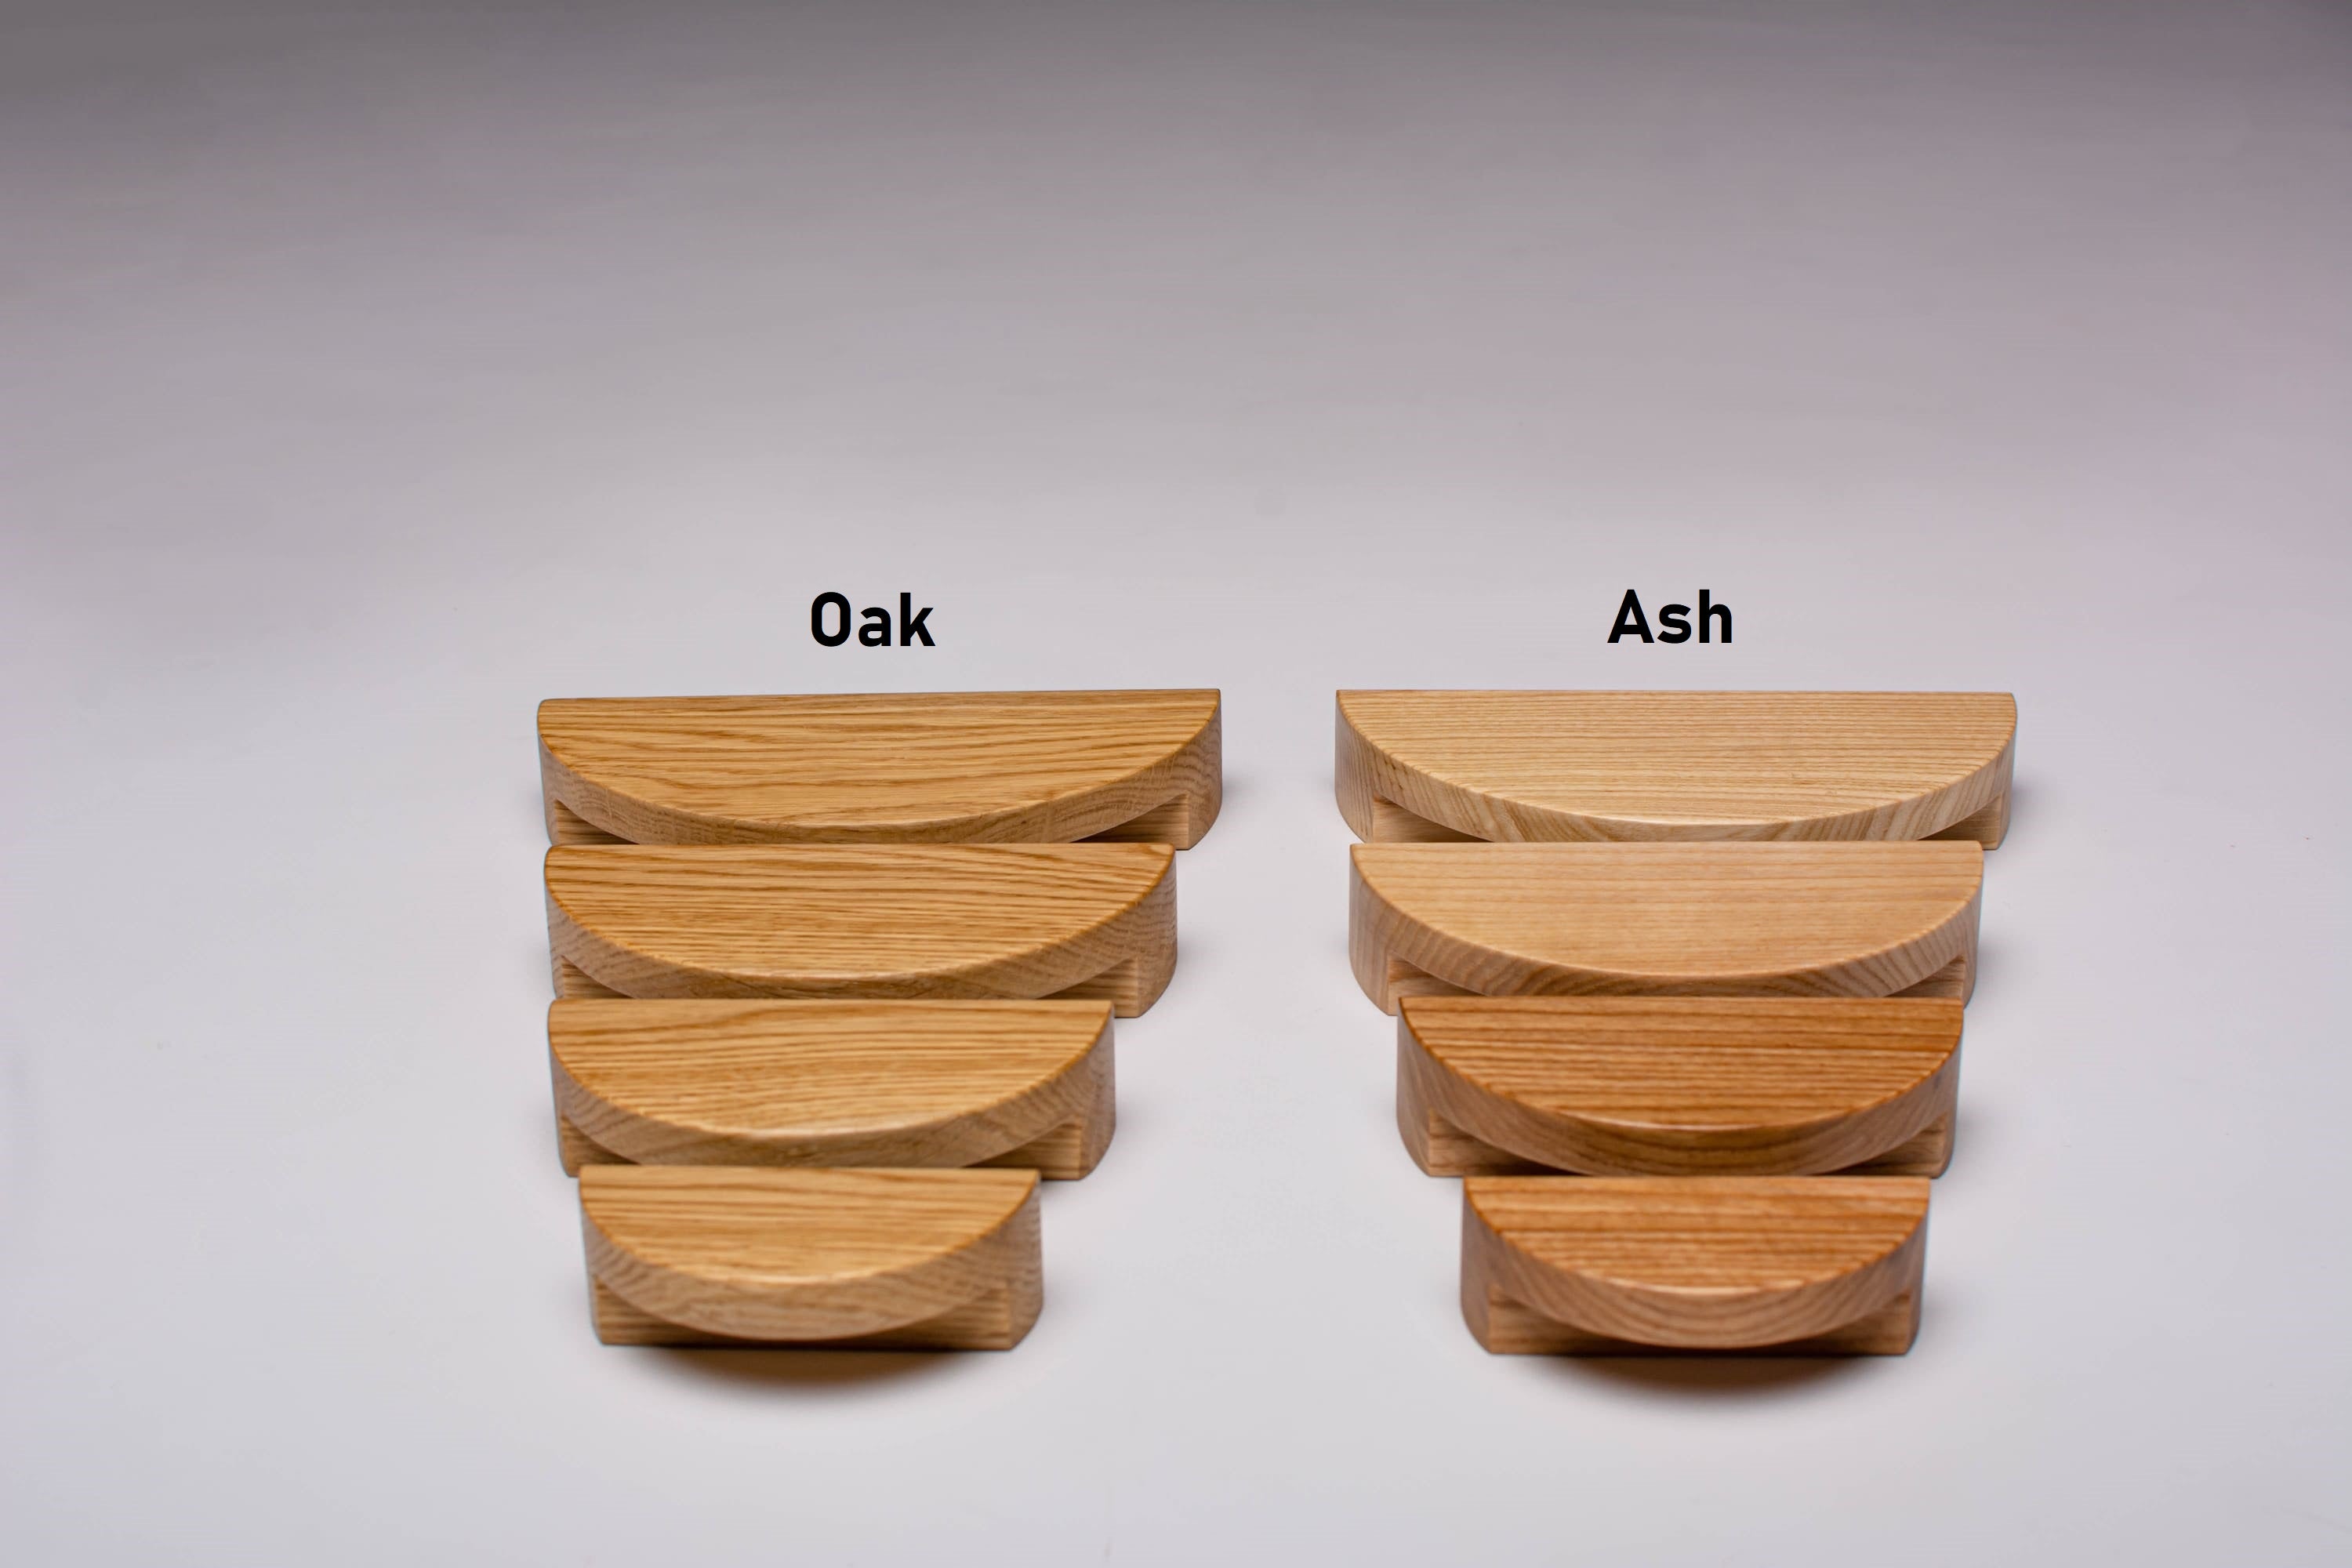 Wooden Drawer Handles in different sizes. Example grain difference between ash and oak